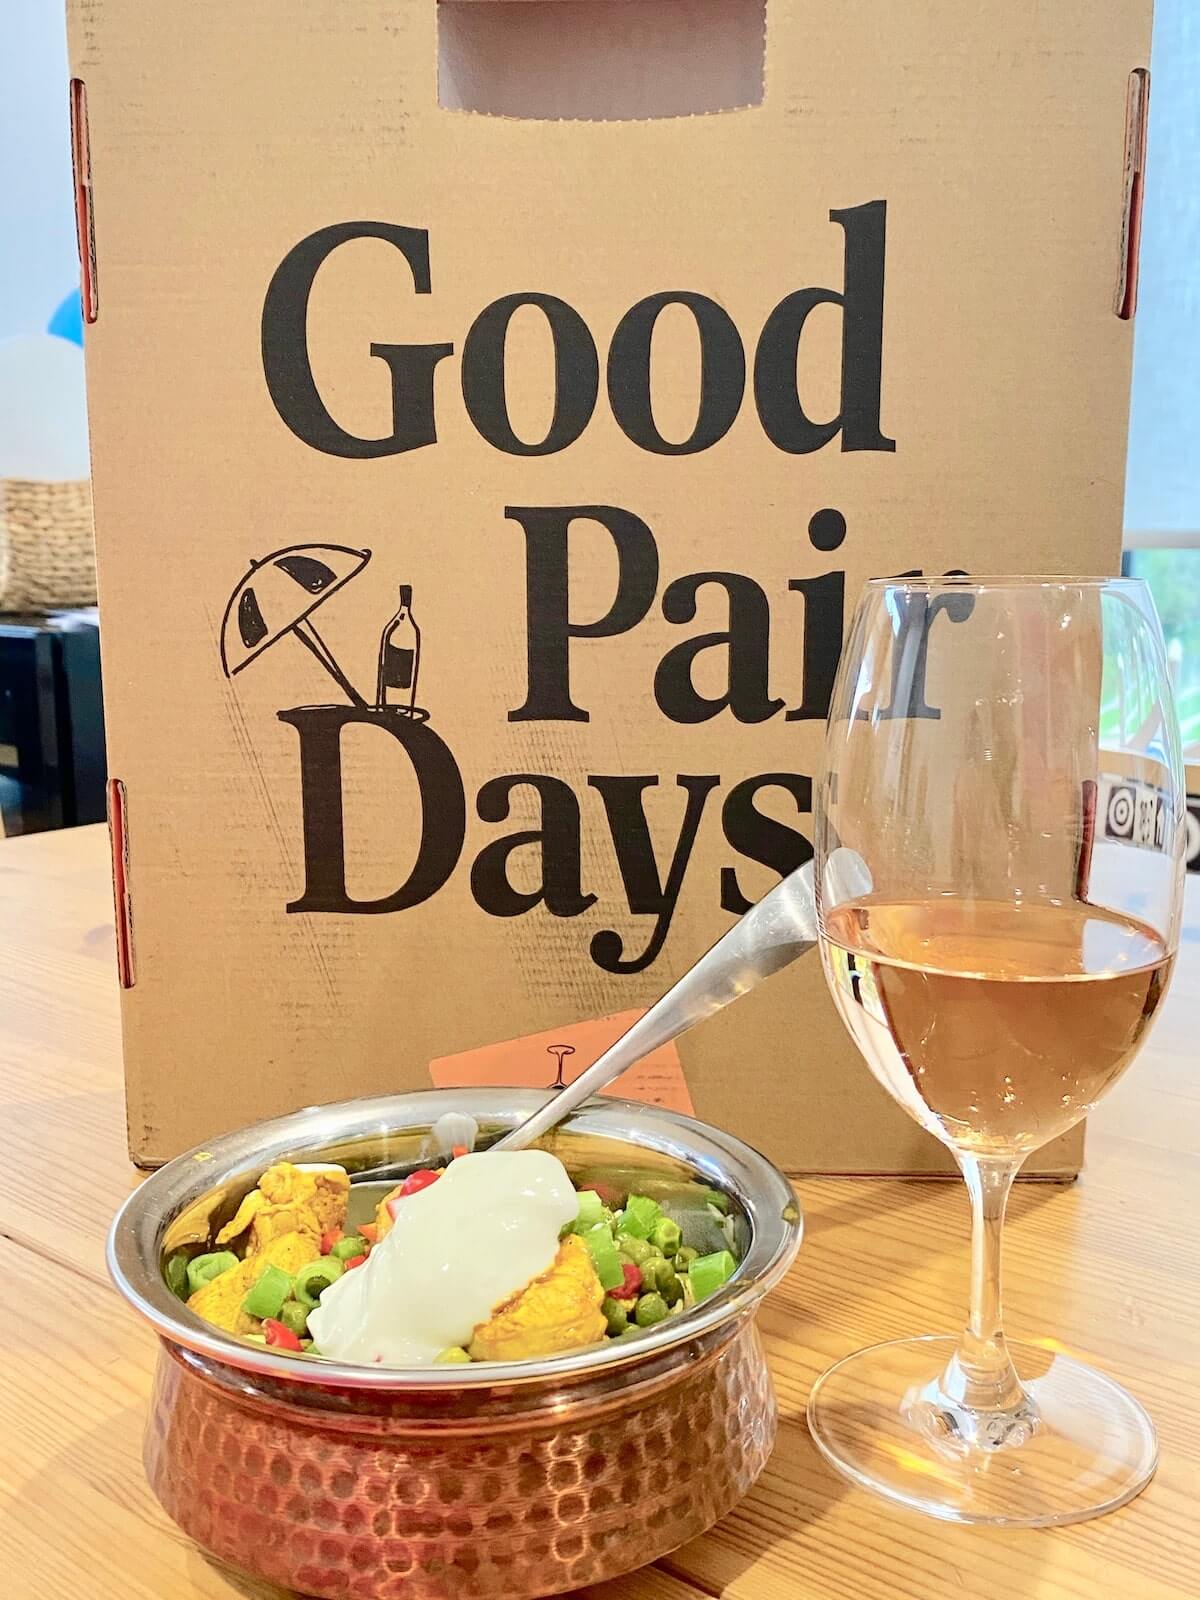 Good Pair Days wine subscription box and glass of rose wine